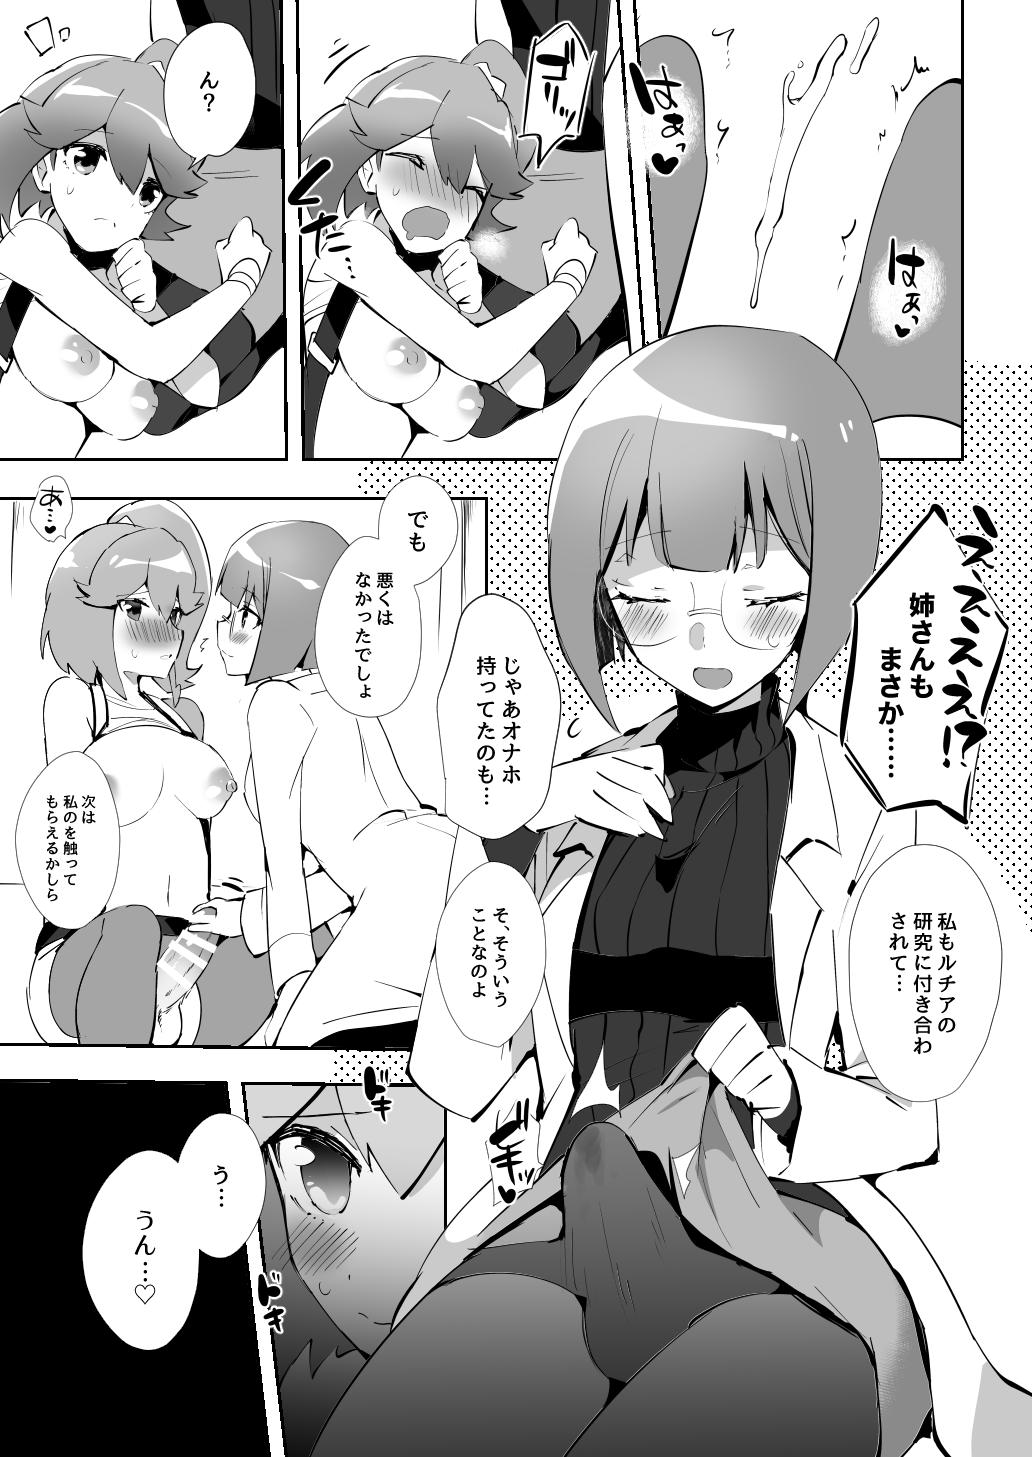 Horny エリアイガロックス前日譚 - Promare Family Taboo - Page 6